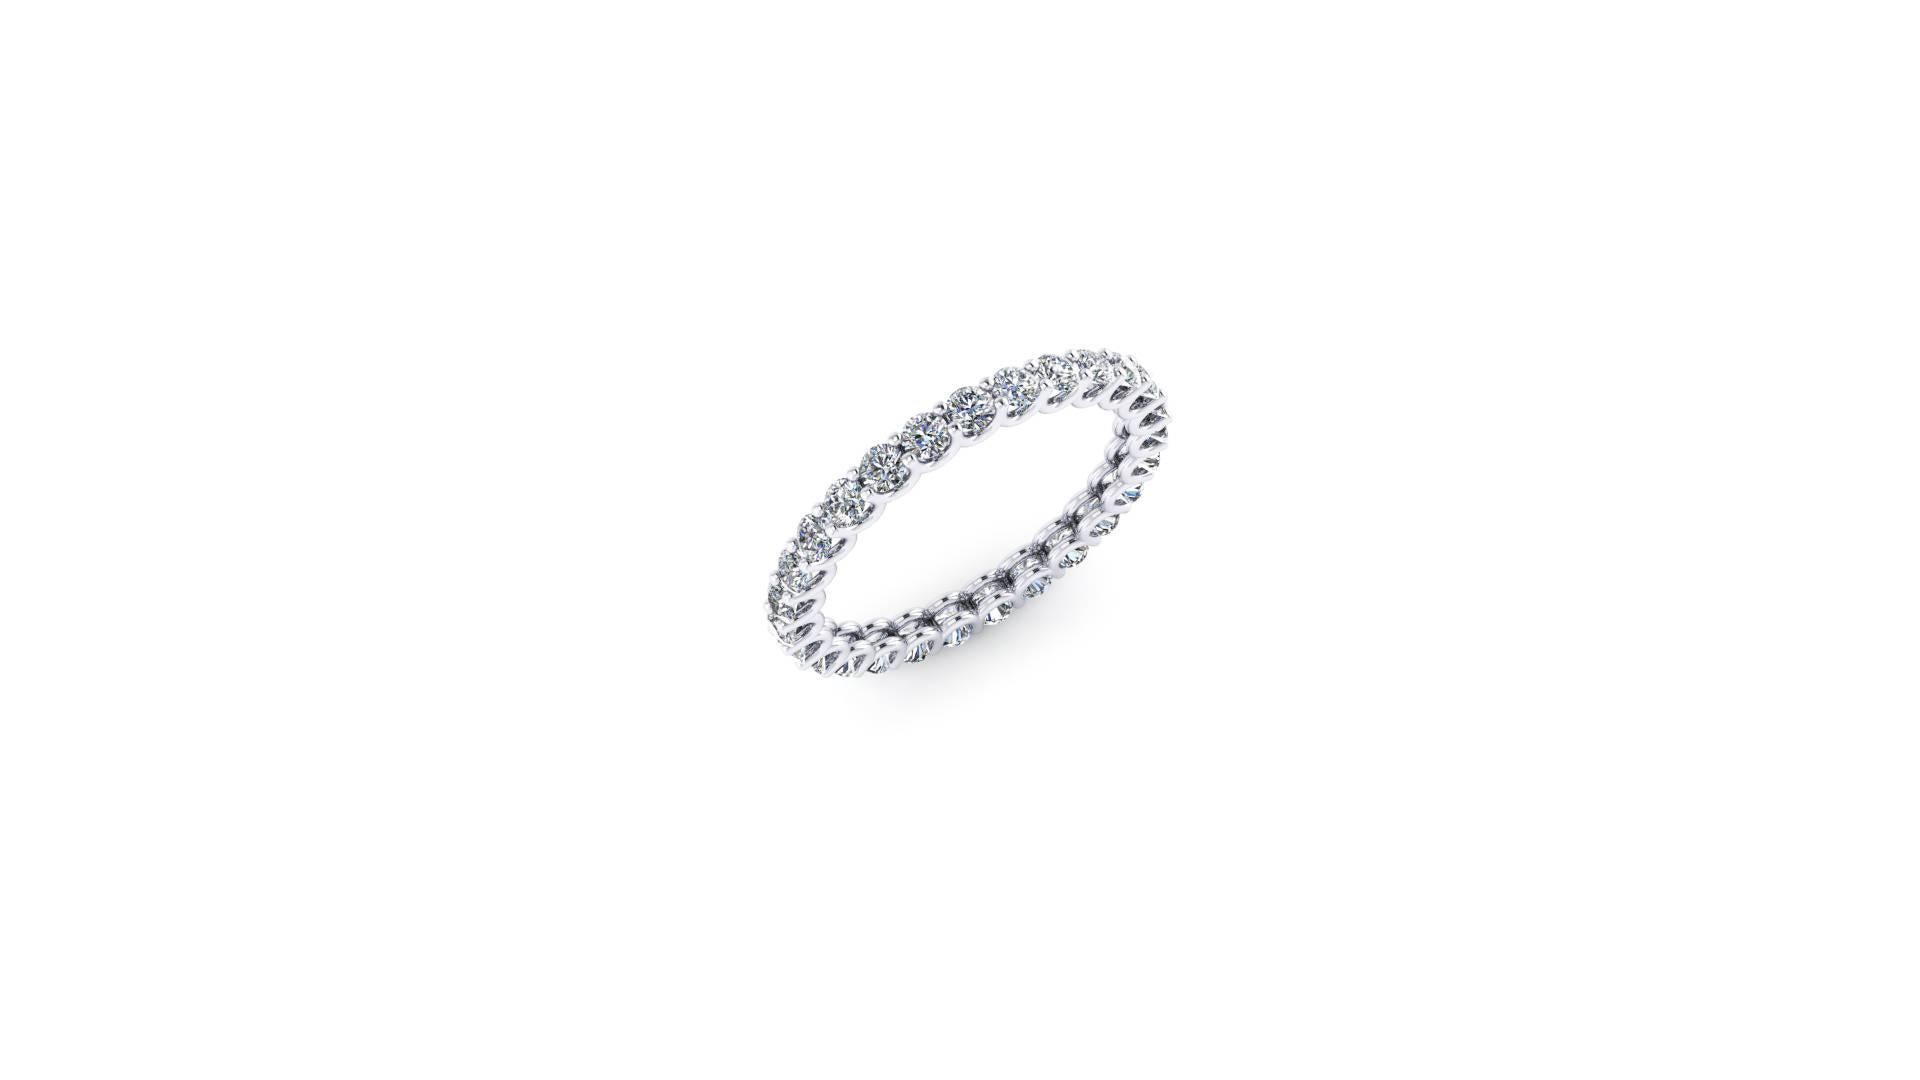 from FERRUCCI a 1.00 carats total weight Eternity Scallop band, hand made and set in Platinum 950 in New York CIty. The diamonds selected for this band are G color, VS/SI1+++ clarity, very nice white diamonds.
Ring size 6 with complimentary sizing